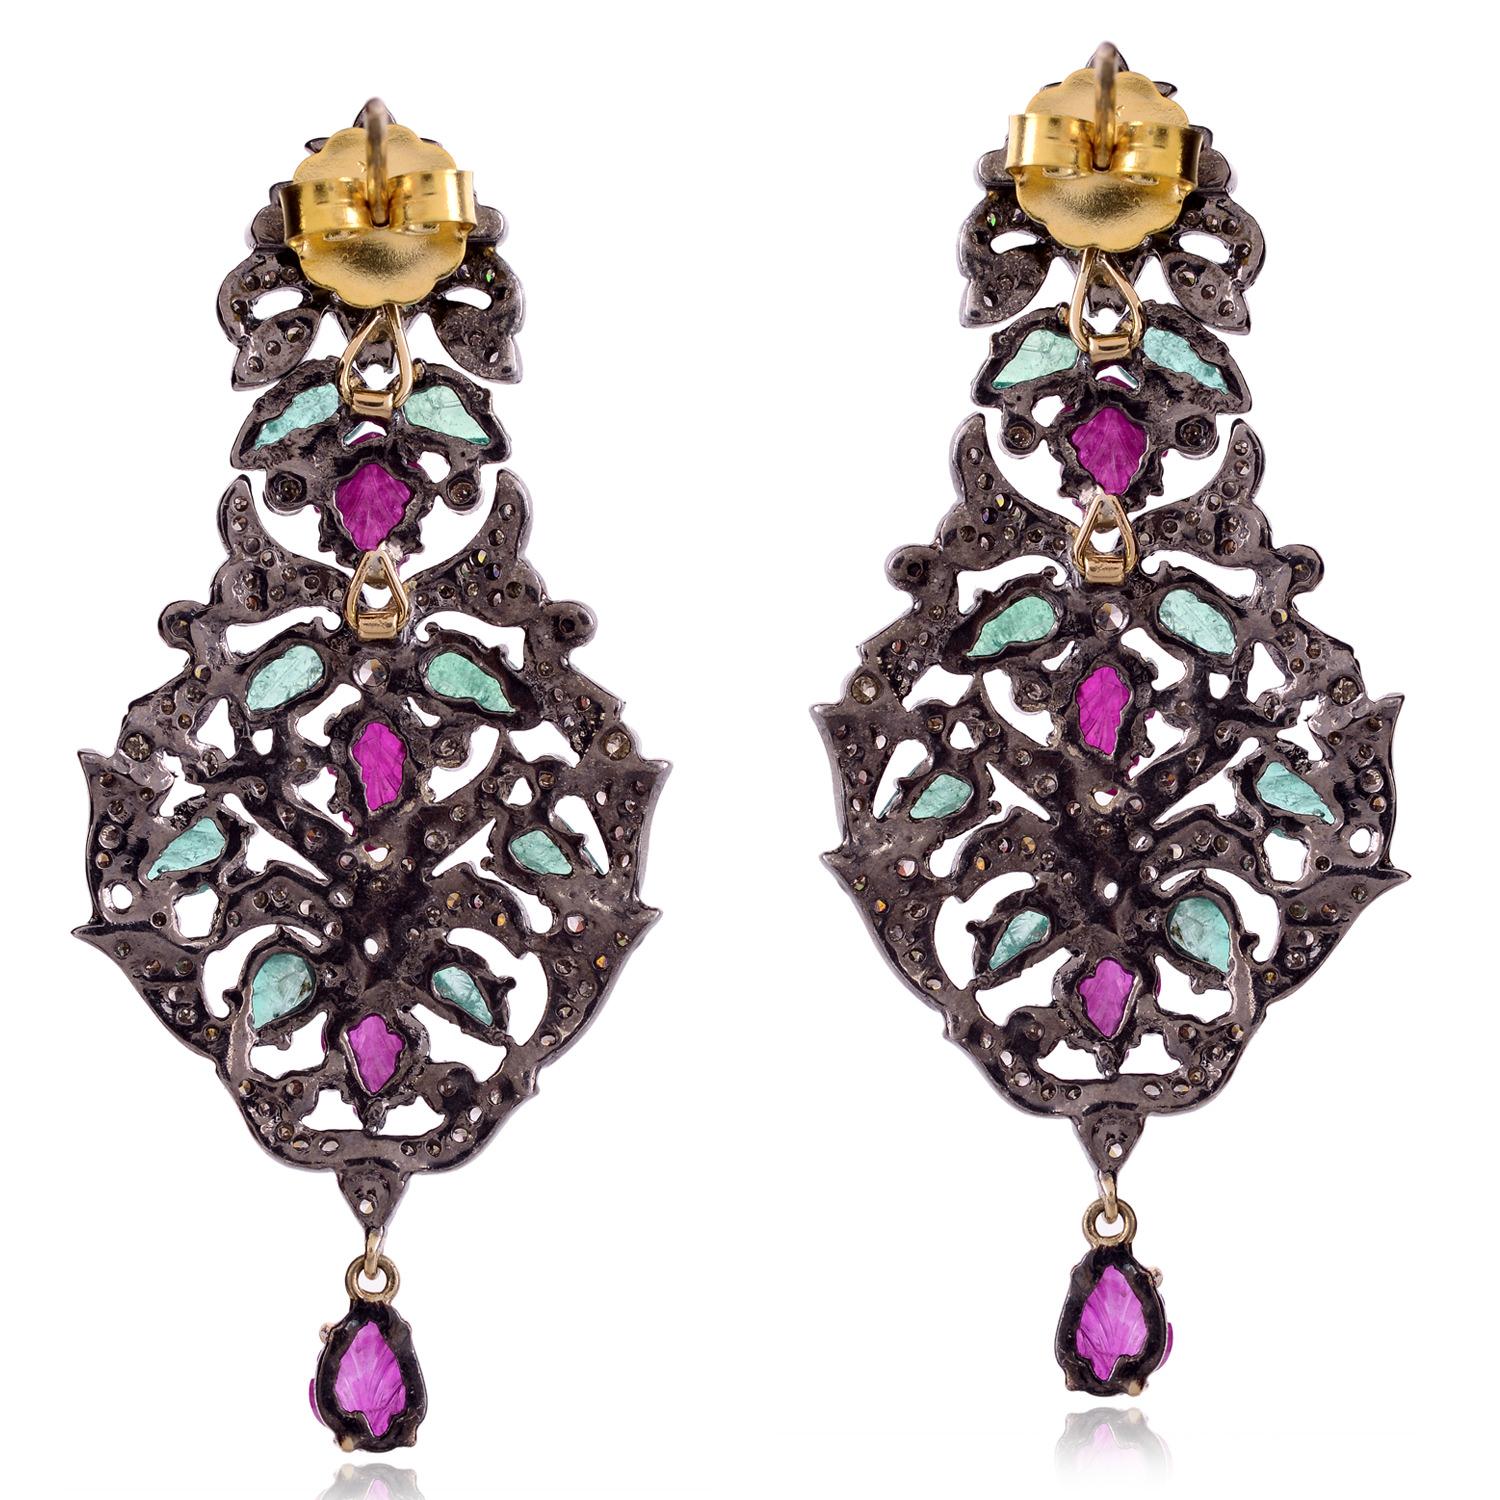 The earrings are adorned with Emerald , Ruby and pave diamonds, which are small diamonds that are set closely together in a surface, giving the appearance of a continuous surface of sparkling diamonds. These earrings are likely to be quite beautiful